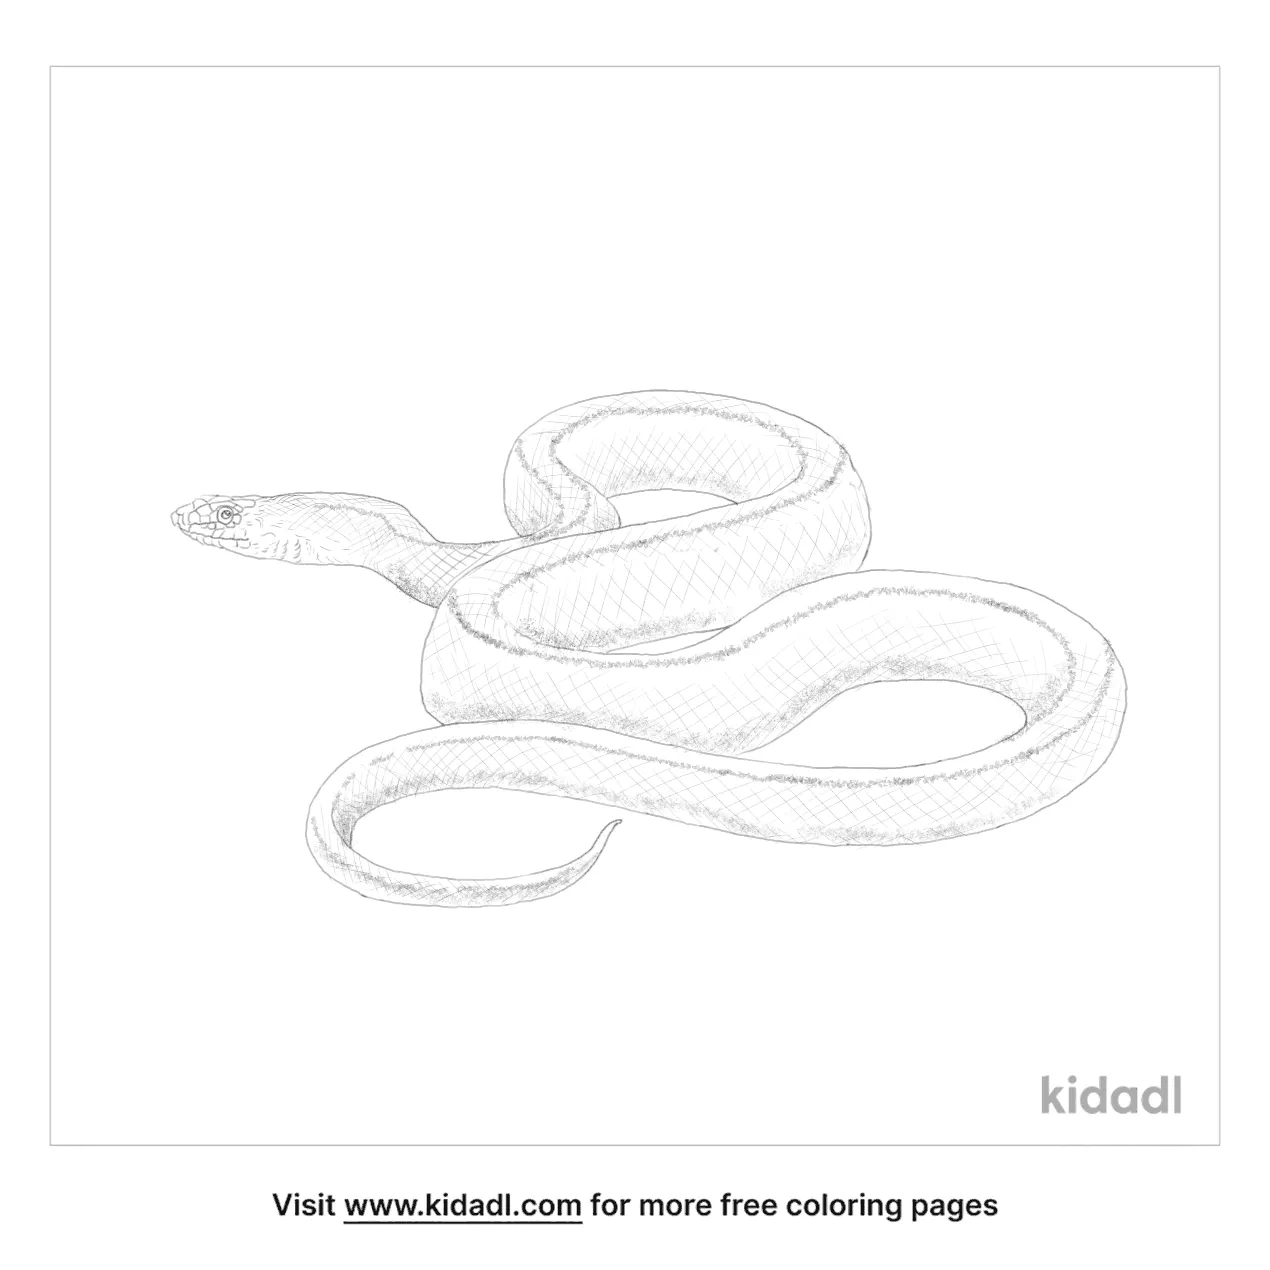 Free ladder snake coloring page coloring page printables